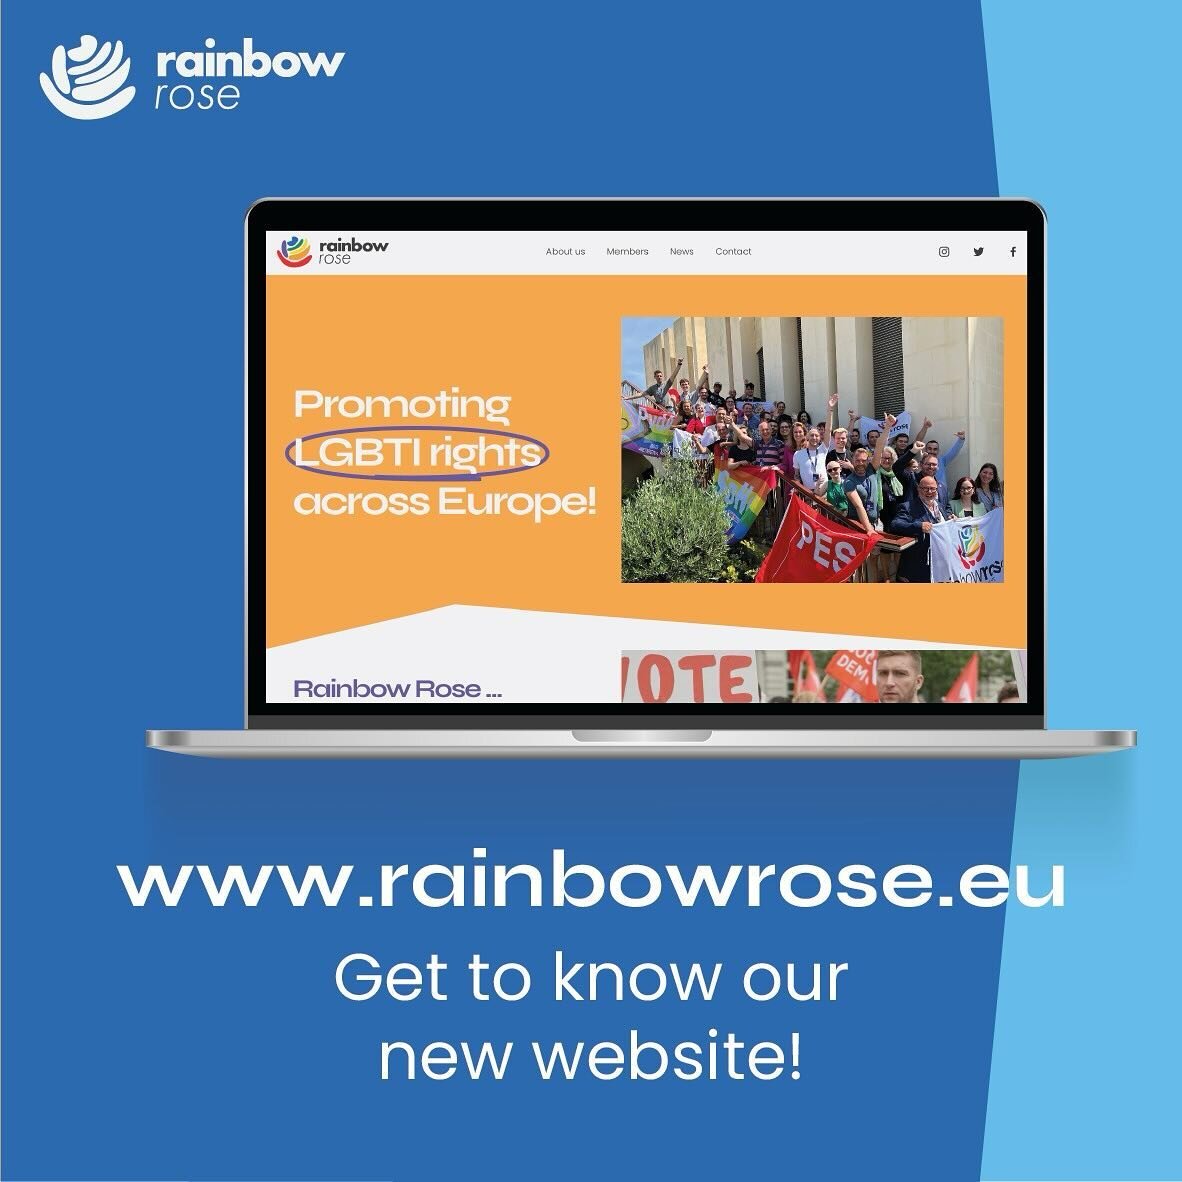 💻 Do you already know www.rainbowrose.eu 🏳️&zwj;🌈
Check out our new website in our brand-new design! As #RainbowRose we continue our fight for LGBTIQ+ rights all over Europe with a fresh look!